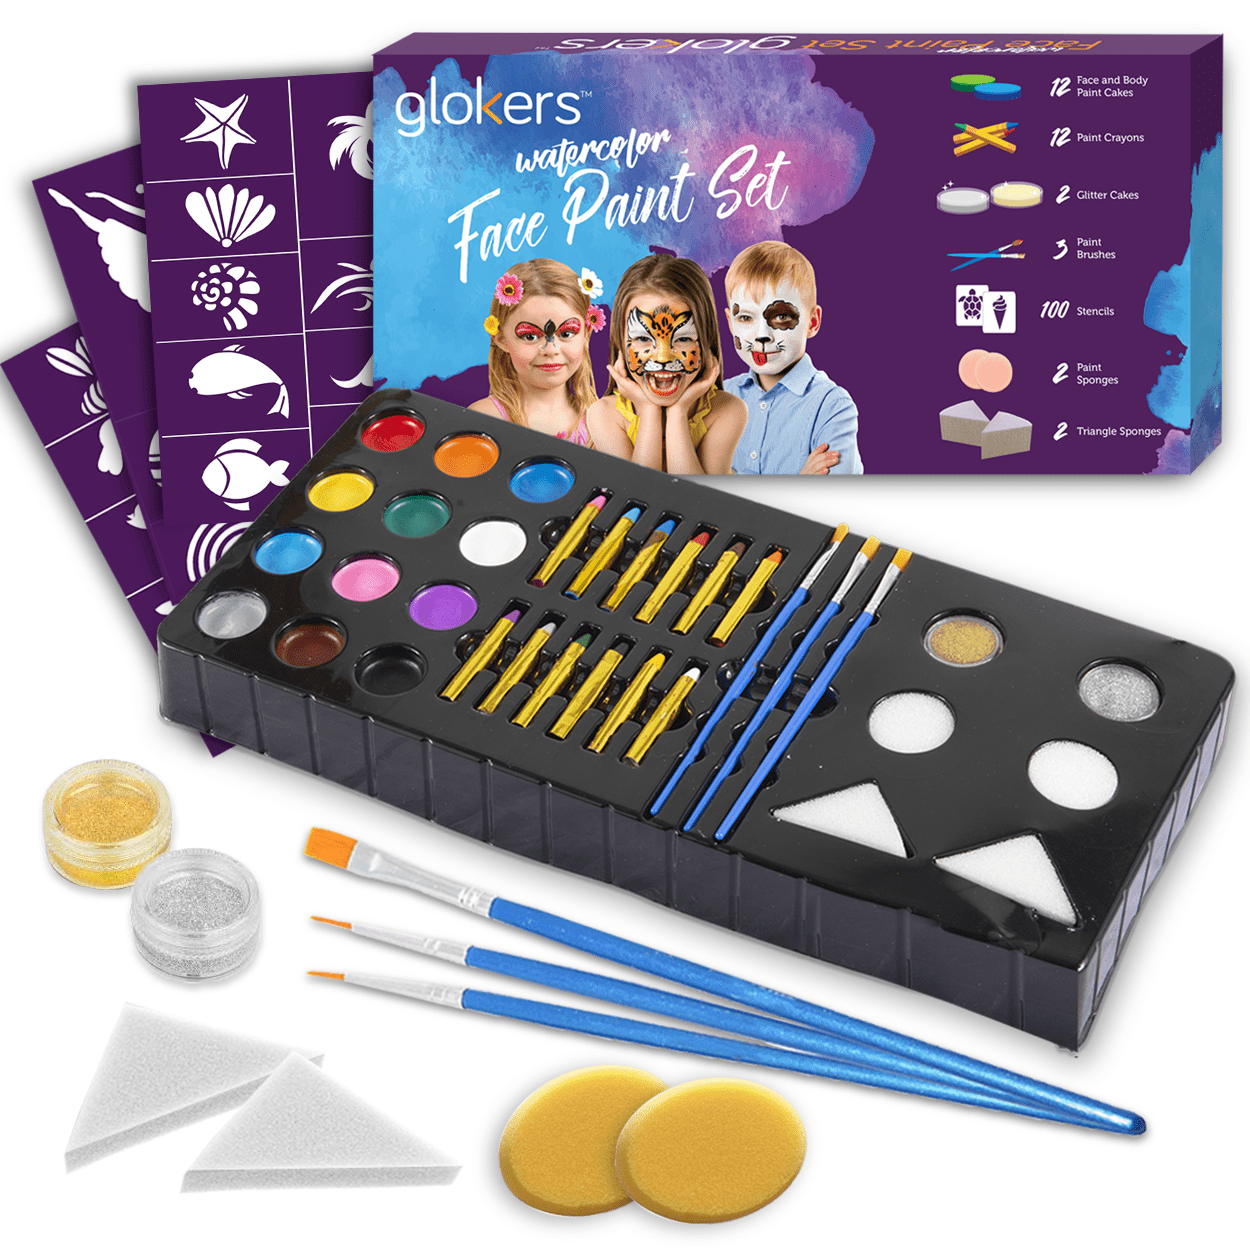 Blue Squid Face Paint Kit for Kids Review: Lovely Painted Faces